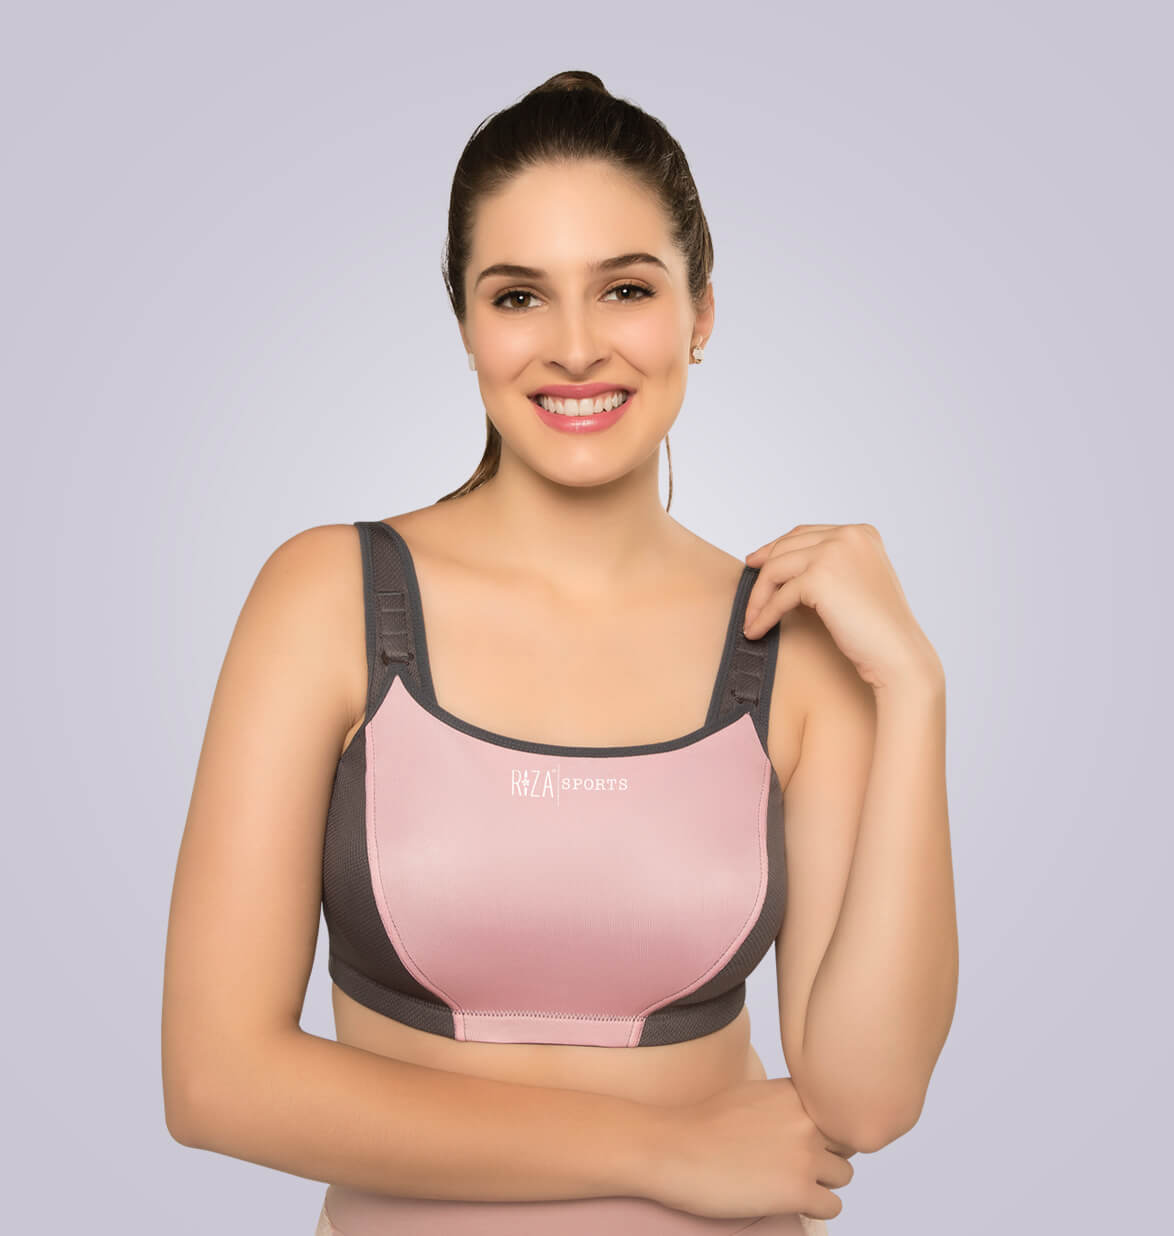 RIZA by TRYLO - A perfectly fit bra can surely make you